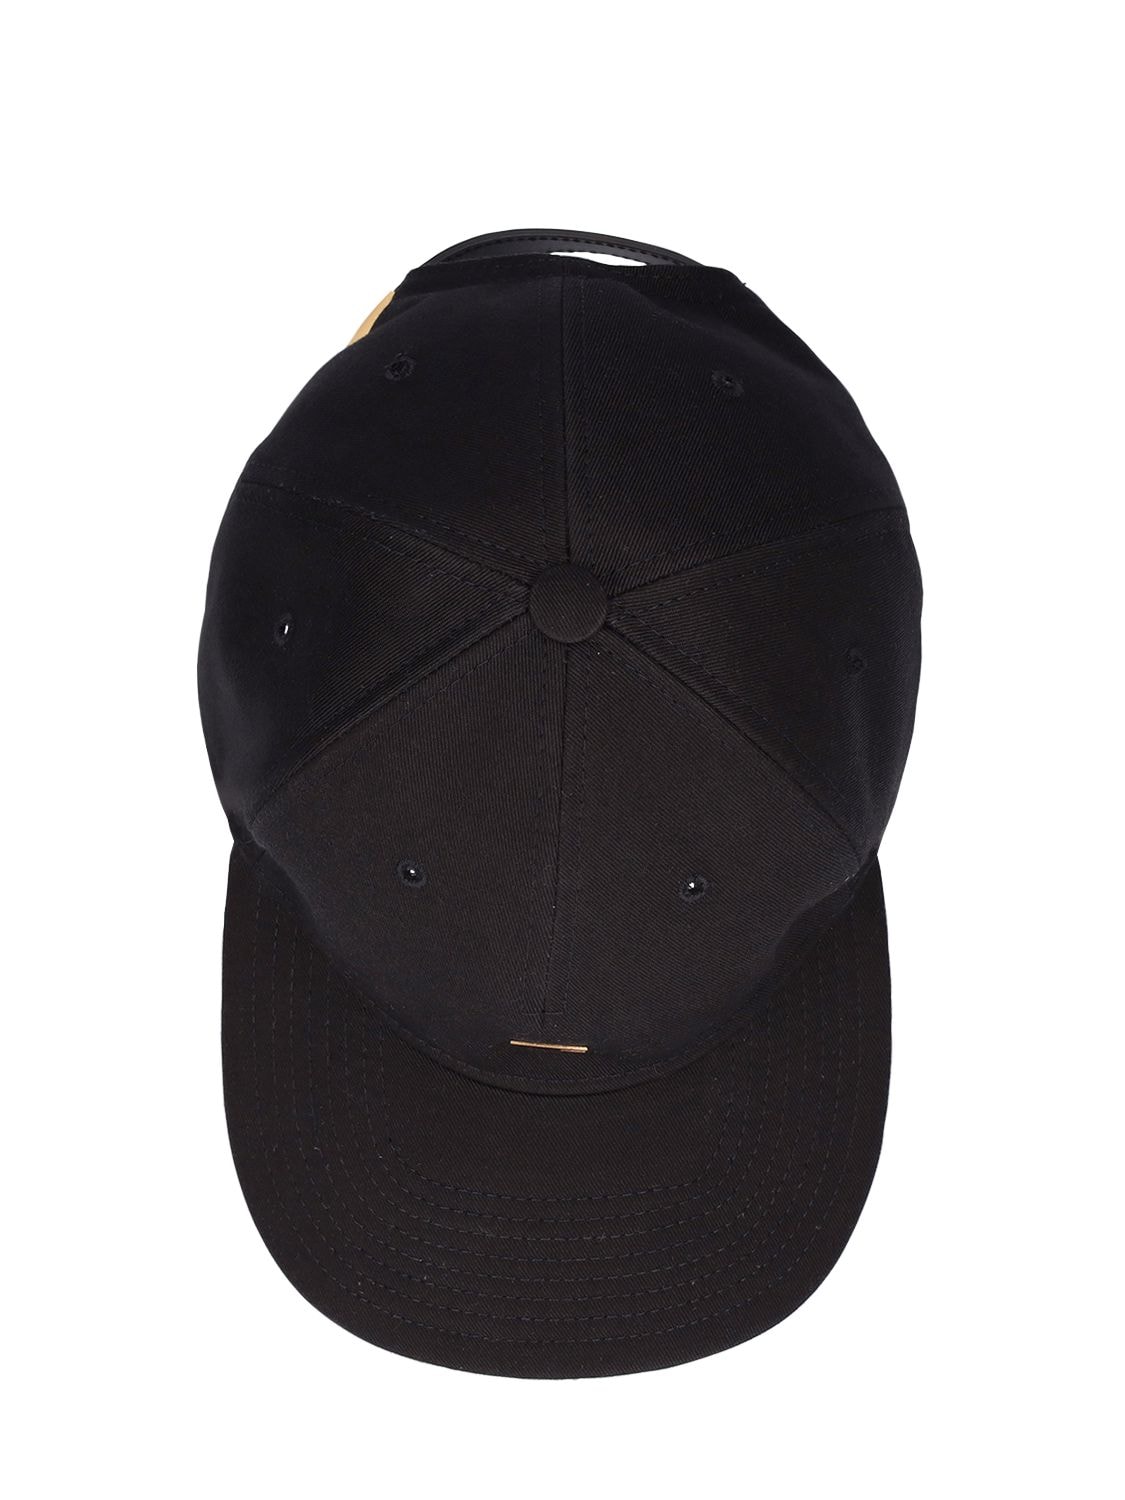 Shop Tom Ford Tf Cotton Canvas Baseball Cap In Black